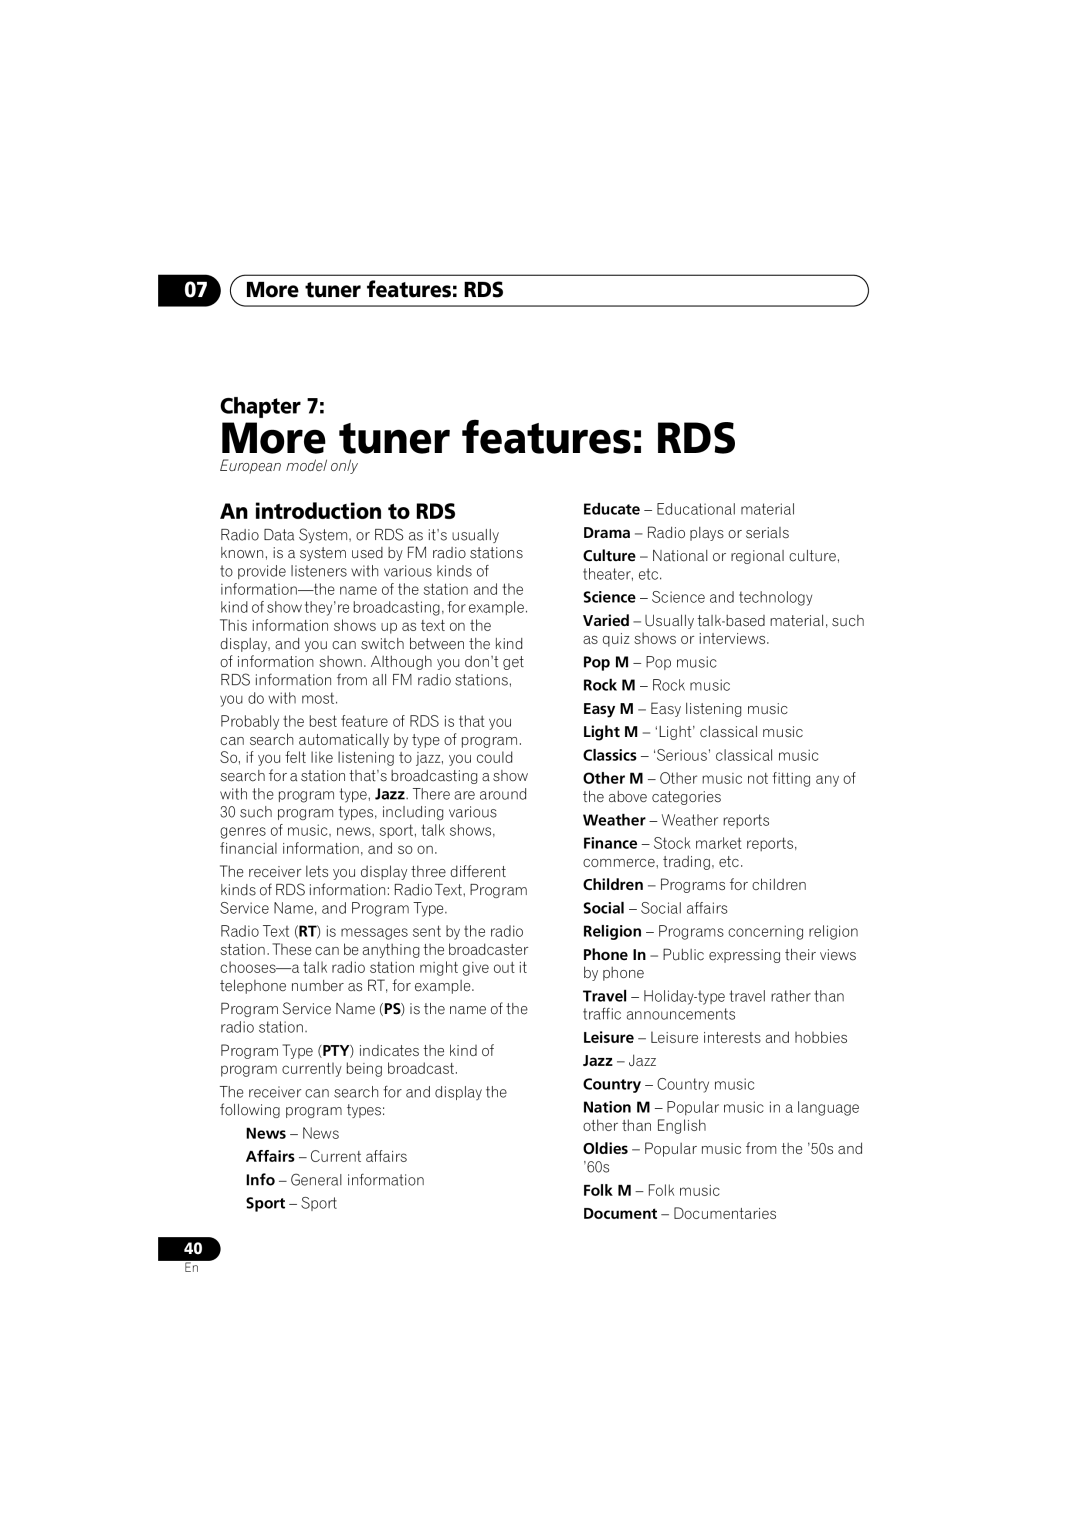 Magnadyne XV-DV323, S-DV424, S-DV323, XV-DV424 More tuner features RDS Chapter, An introduction to RDS 